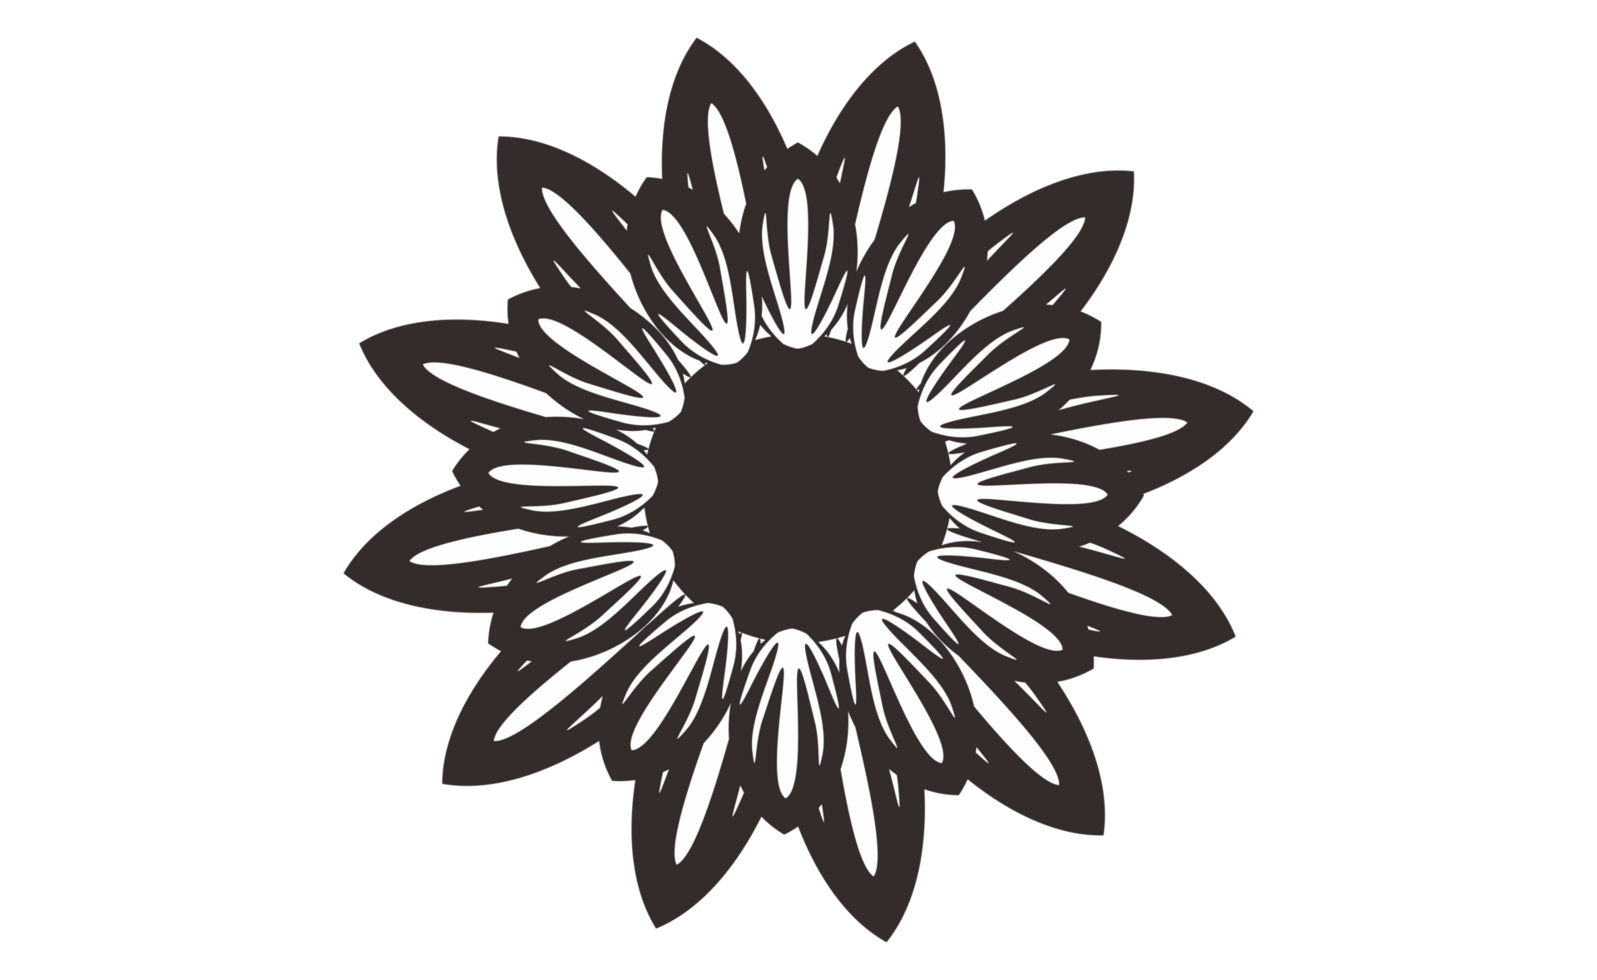 Black Sunflowers Tribal Tattoo On Transparent Background png